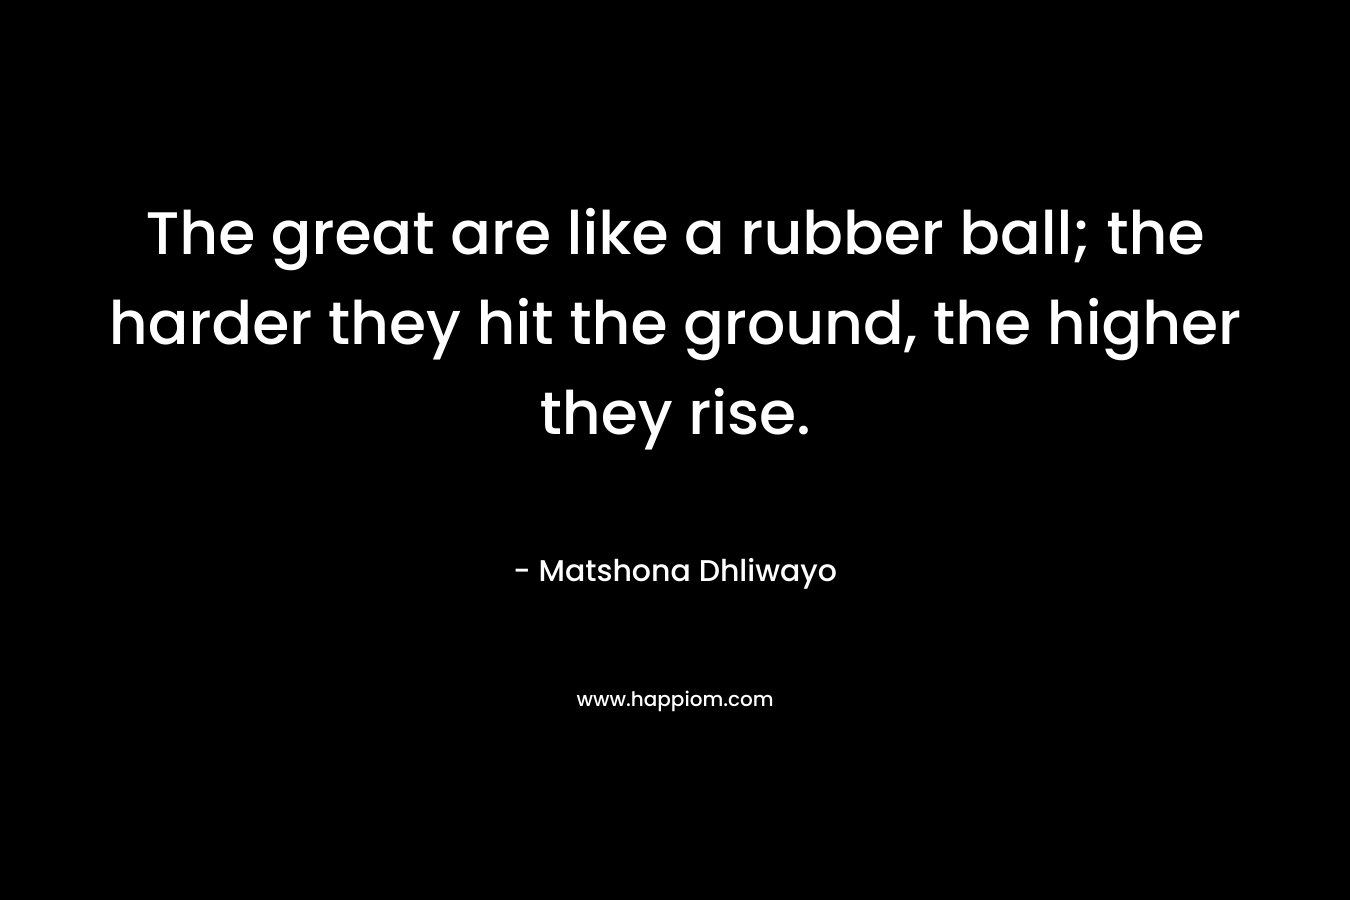 The great are like a rubber ball; the harder they hit the ground, the higher they rise.